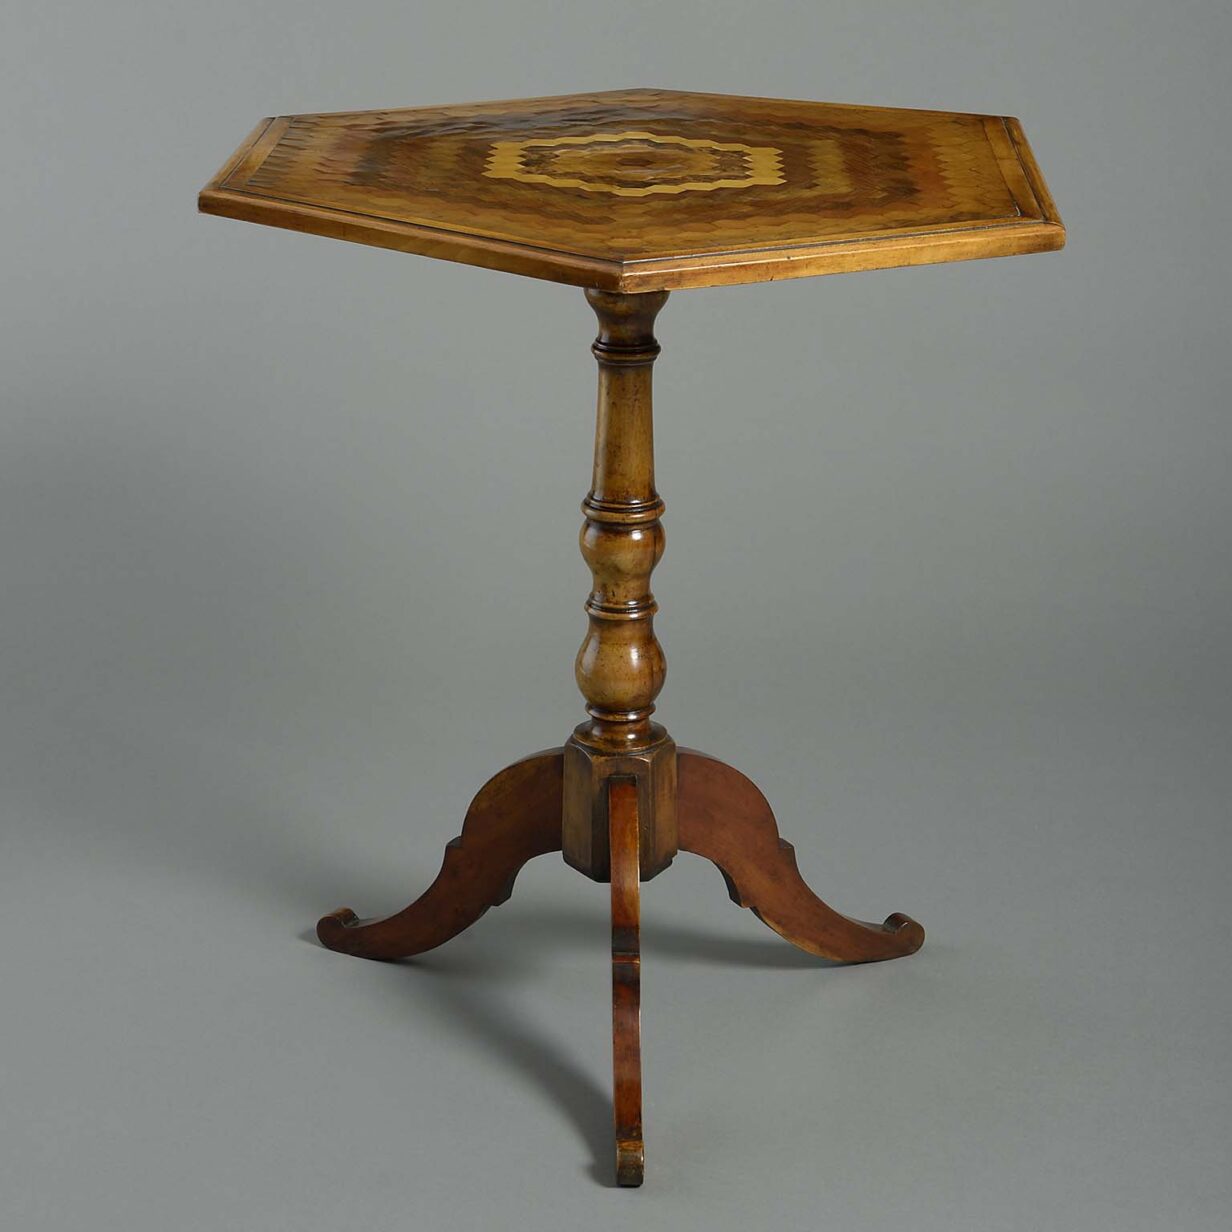 Late 18th century walnut parquetry occasional table